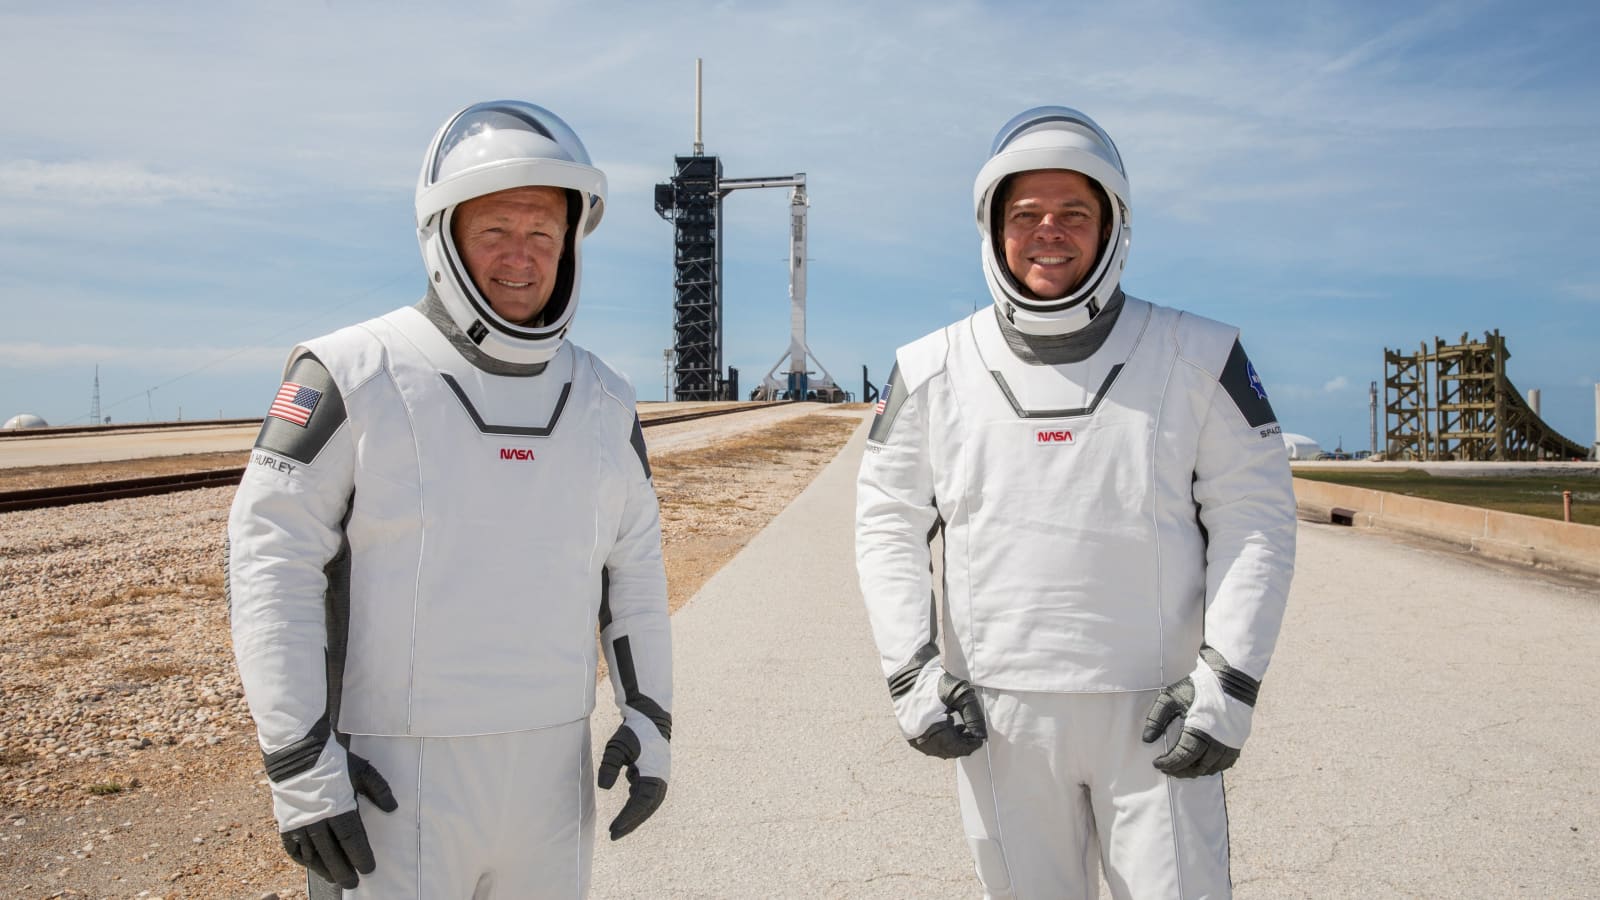 SpaceX Demo-2 NASA astronaut launch: Everything you need to know